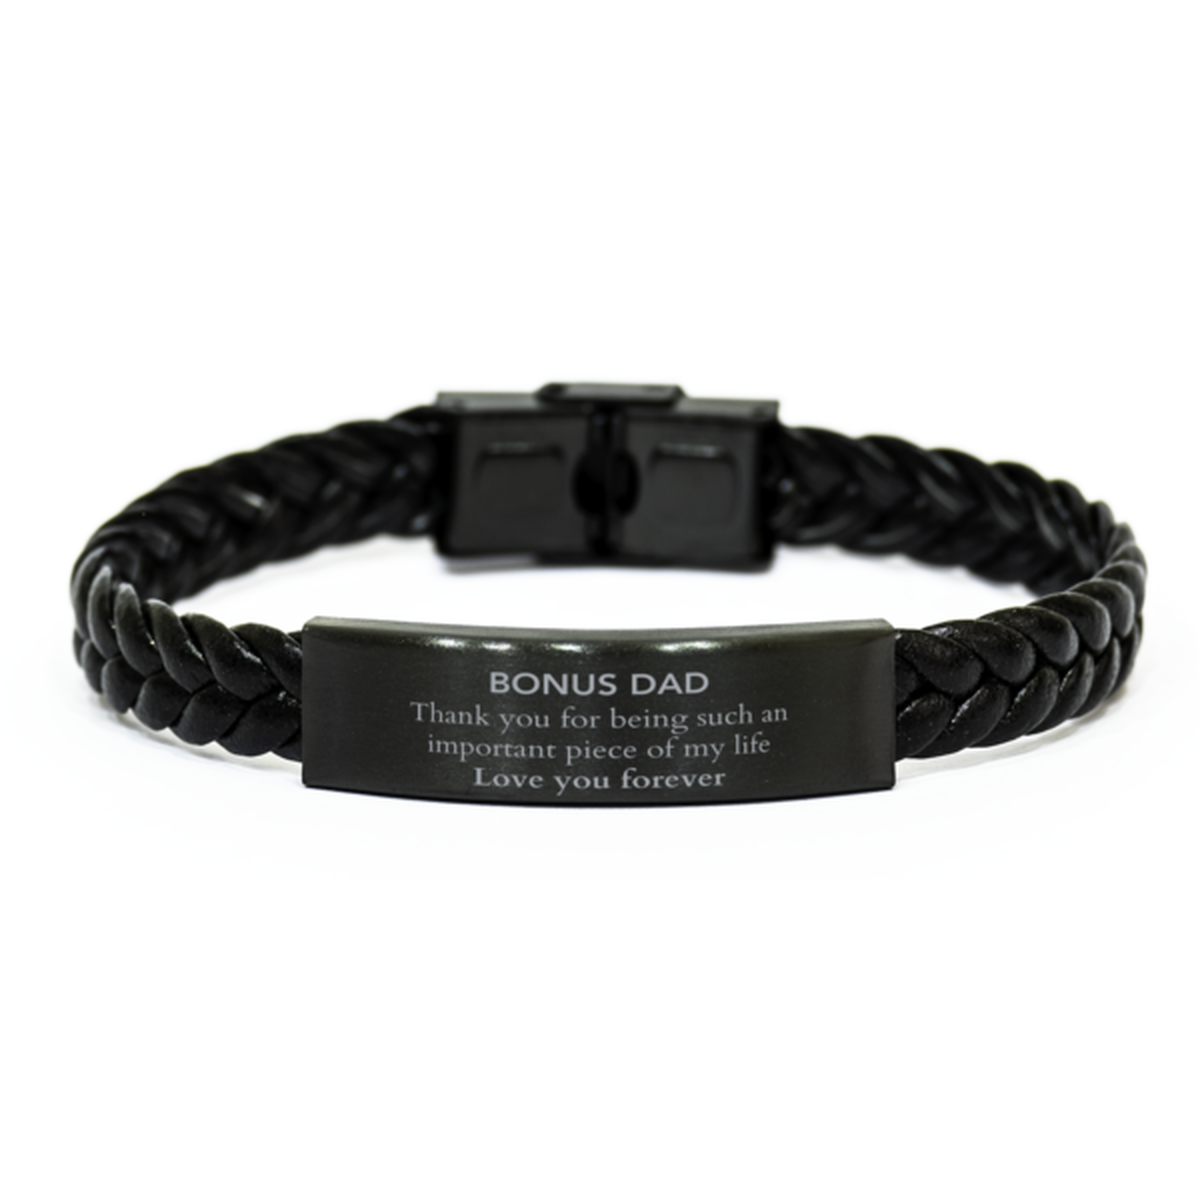 Appropriate Bonus Dad Braided Leather Bracelet Epic Birthday Gifts for Bonus Dad Thank you for being such an important piece of my life Bonus Dad Christmas Mothers Fathers Day